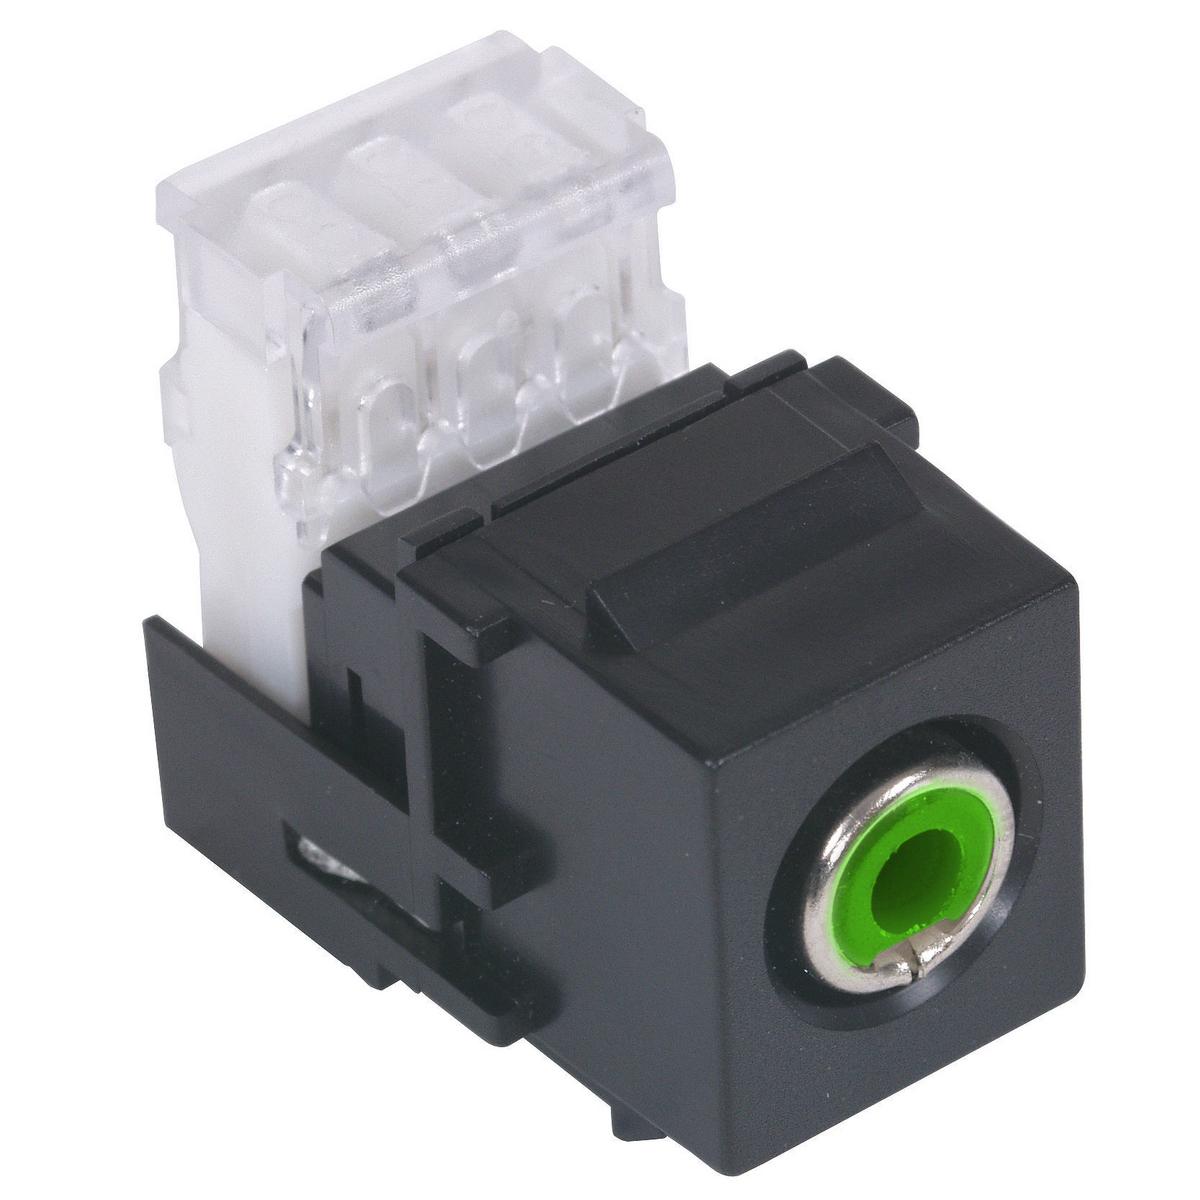 Hubbell SFRC110GN RCA Connector, 110 Termination, Green Insulator, Black Housing  ; Standard Product